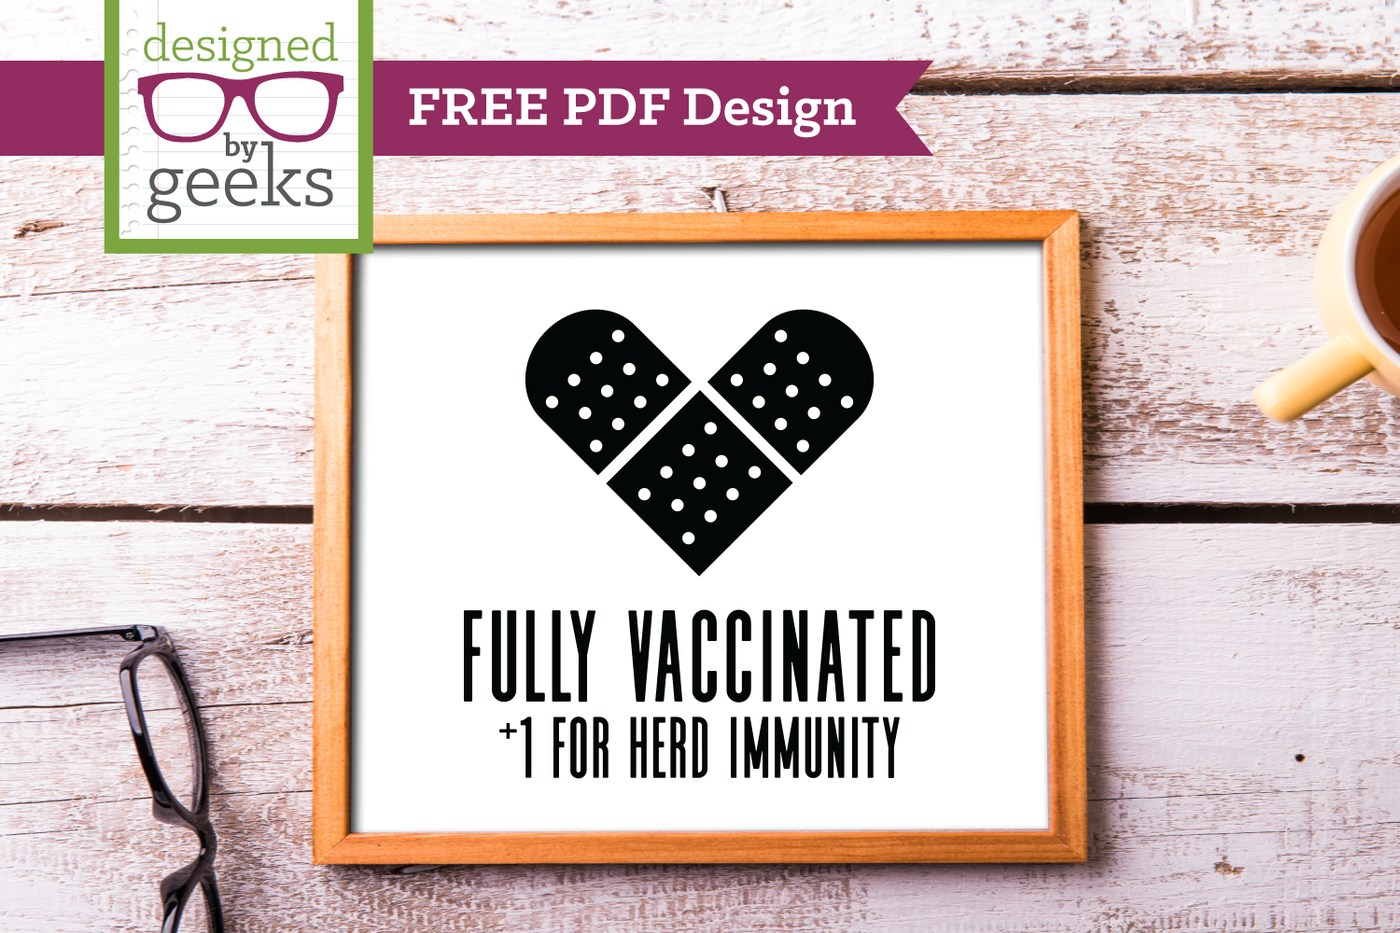 Fully Vaccinated free PDF design